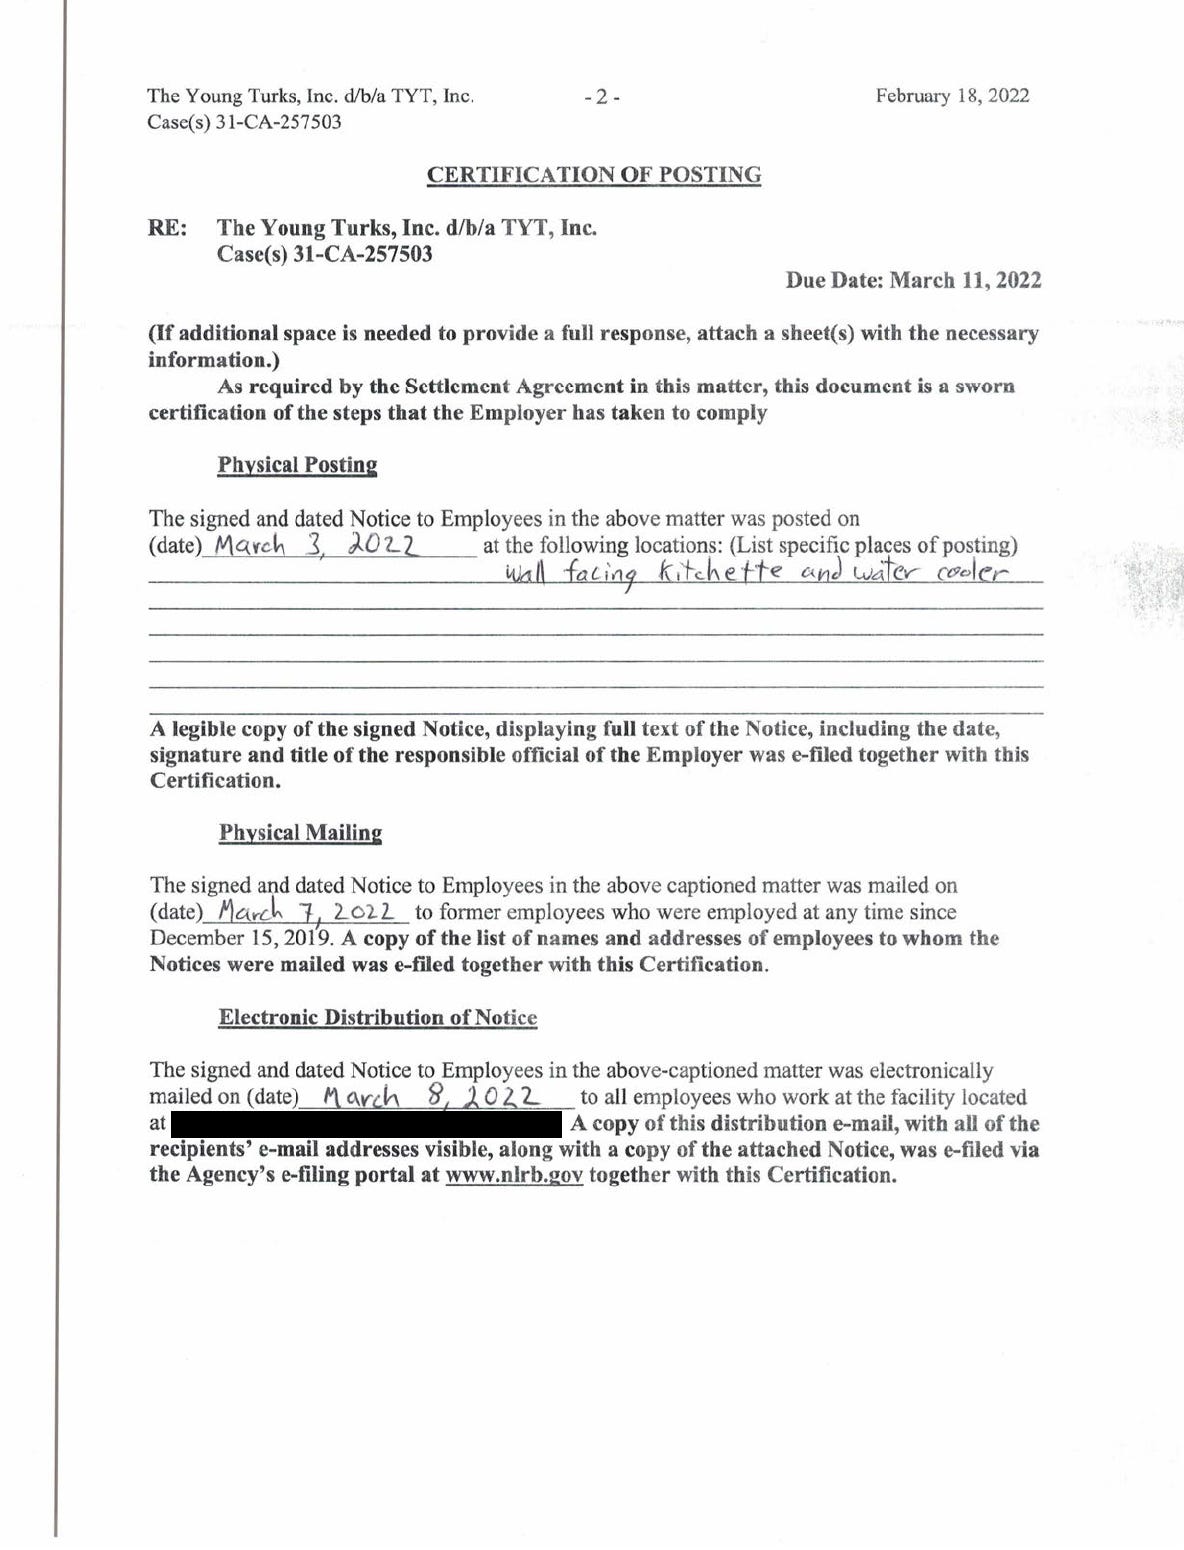 Document titled "Certification of posting" from the NLRB regarding The Young Turks NLRB Notice indicating it was placed on "wall facing kitchette and water cooler" and requires physical mailing to former employees as well as emailing to current employees